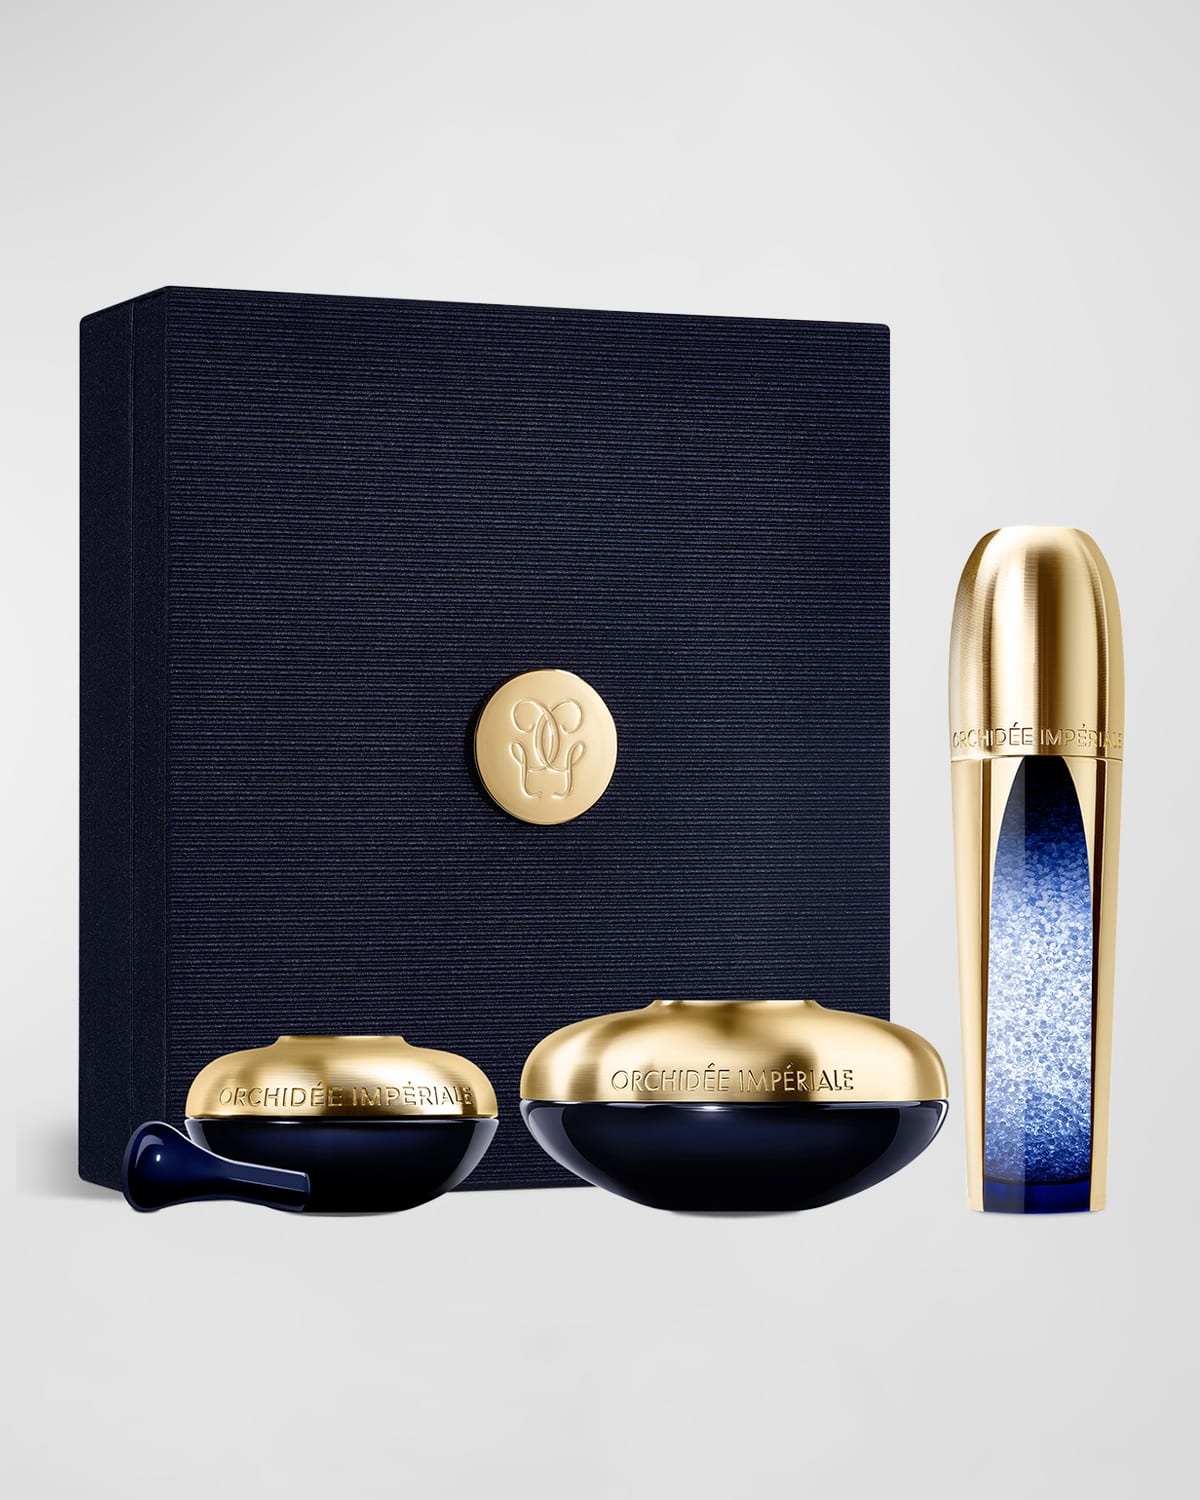 Guerlain Limited Edition Orchidee Imperiale Ritual Set In White